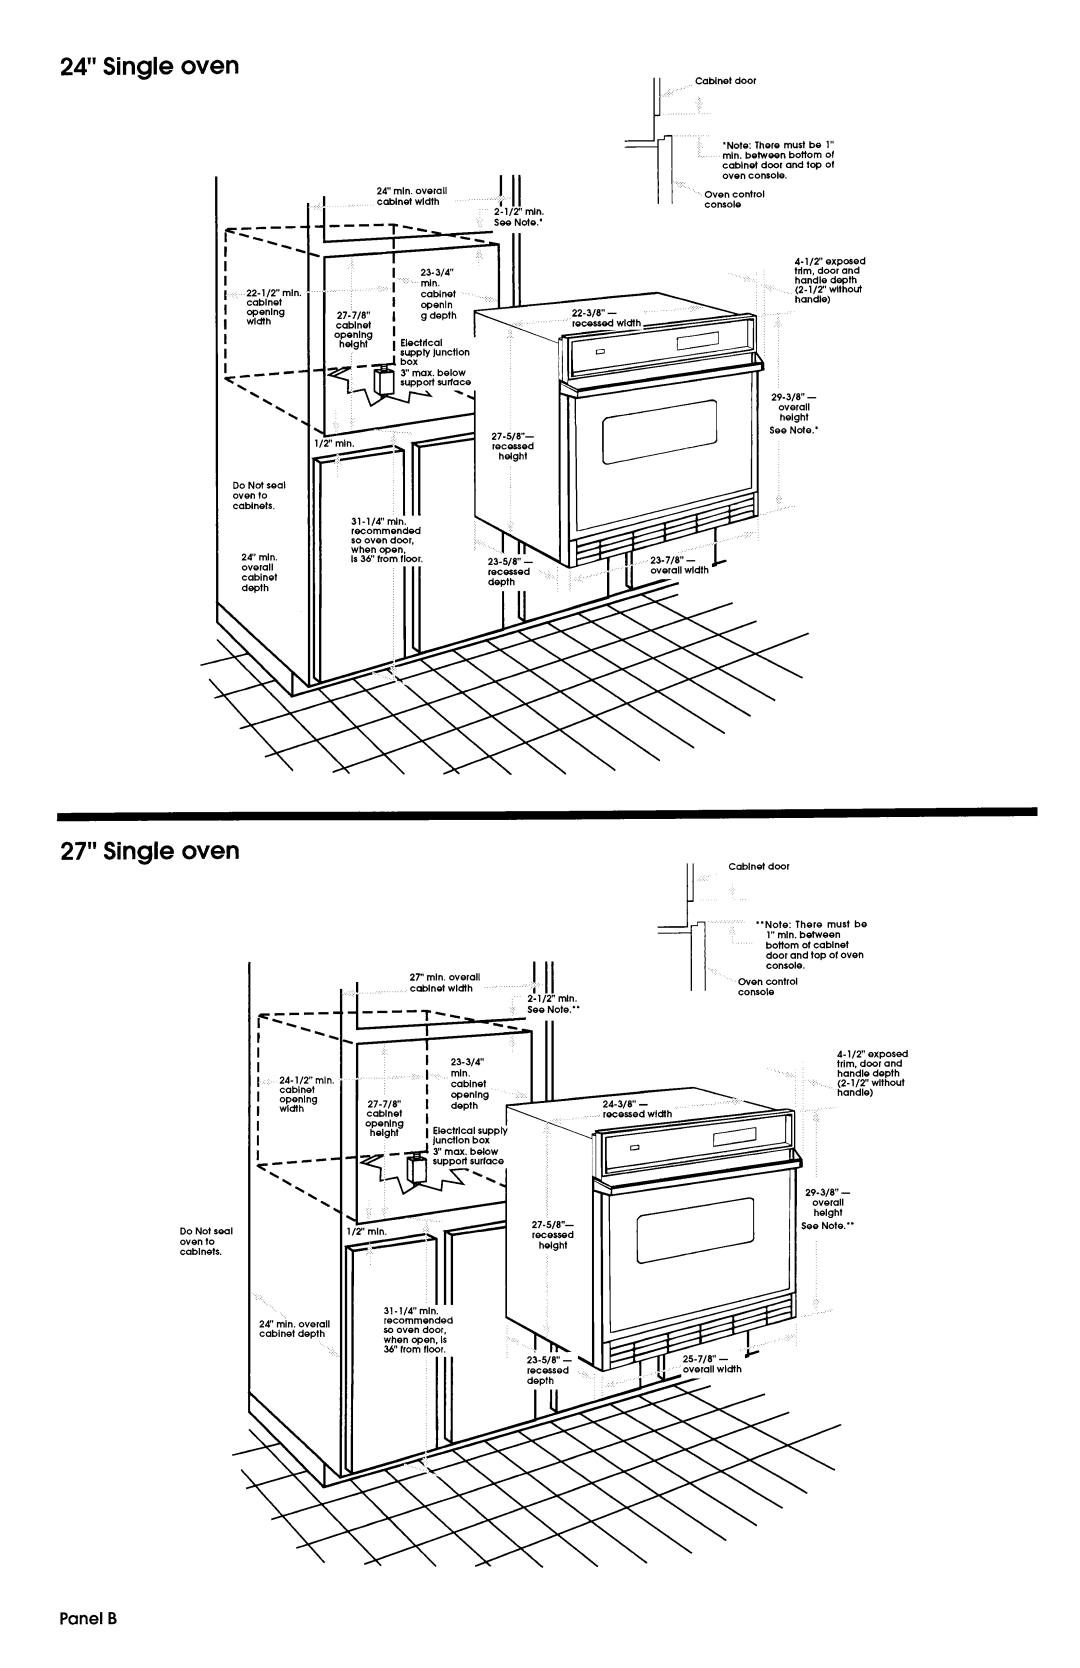 Maytag 3183636 installation instructions 24” Single oven, 27” Single oven, Panel B 